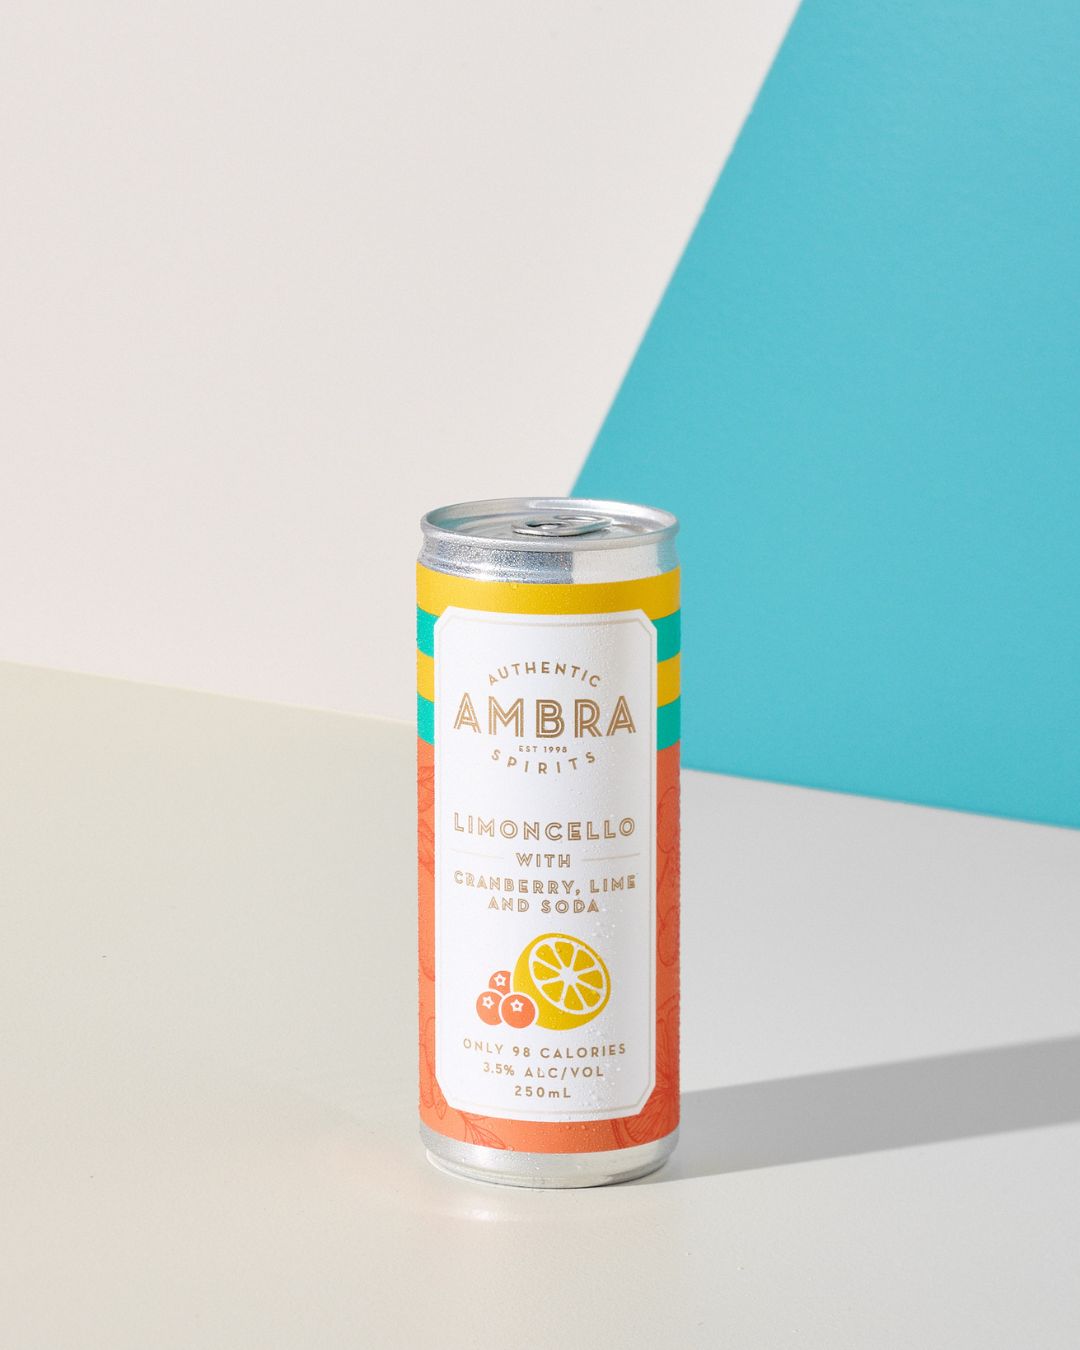 Ambra Limoncello with Cranberry, Lime & Soda Premix Cans